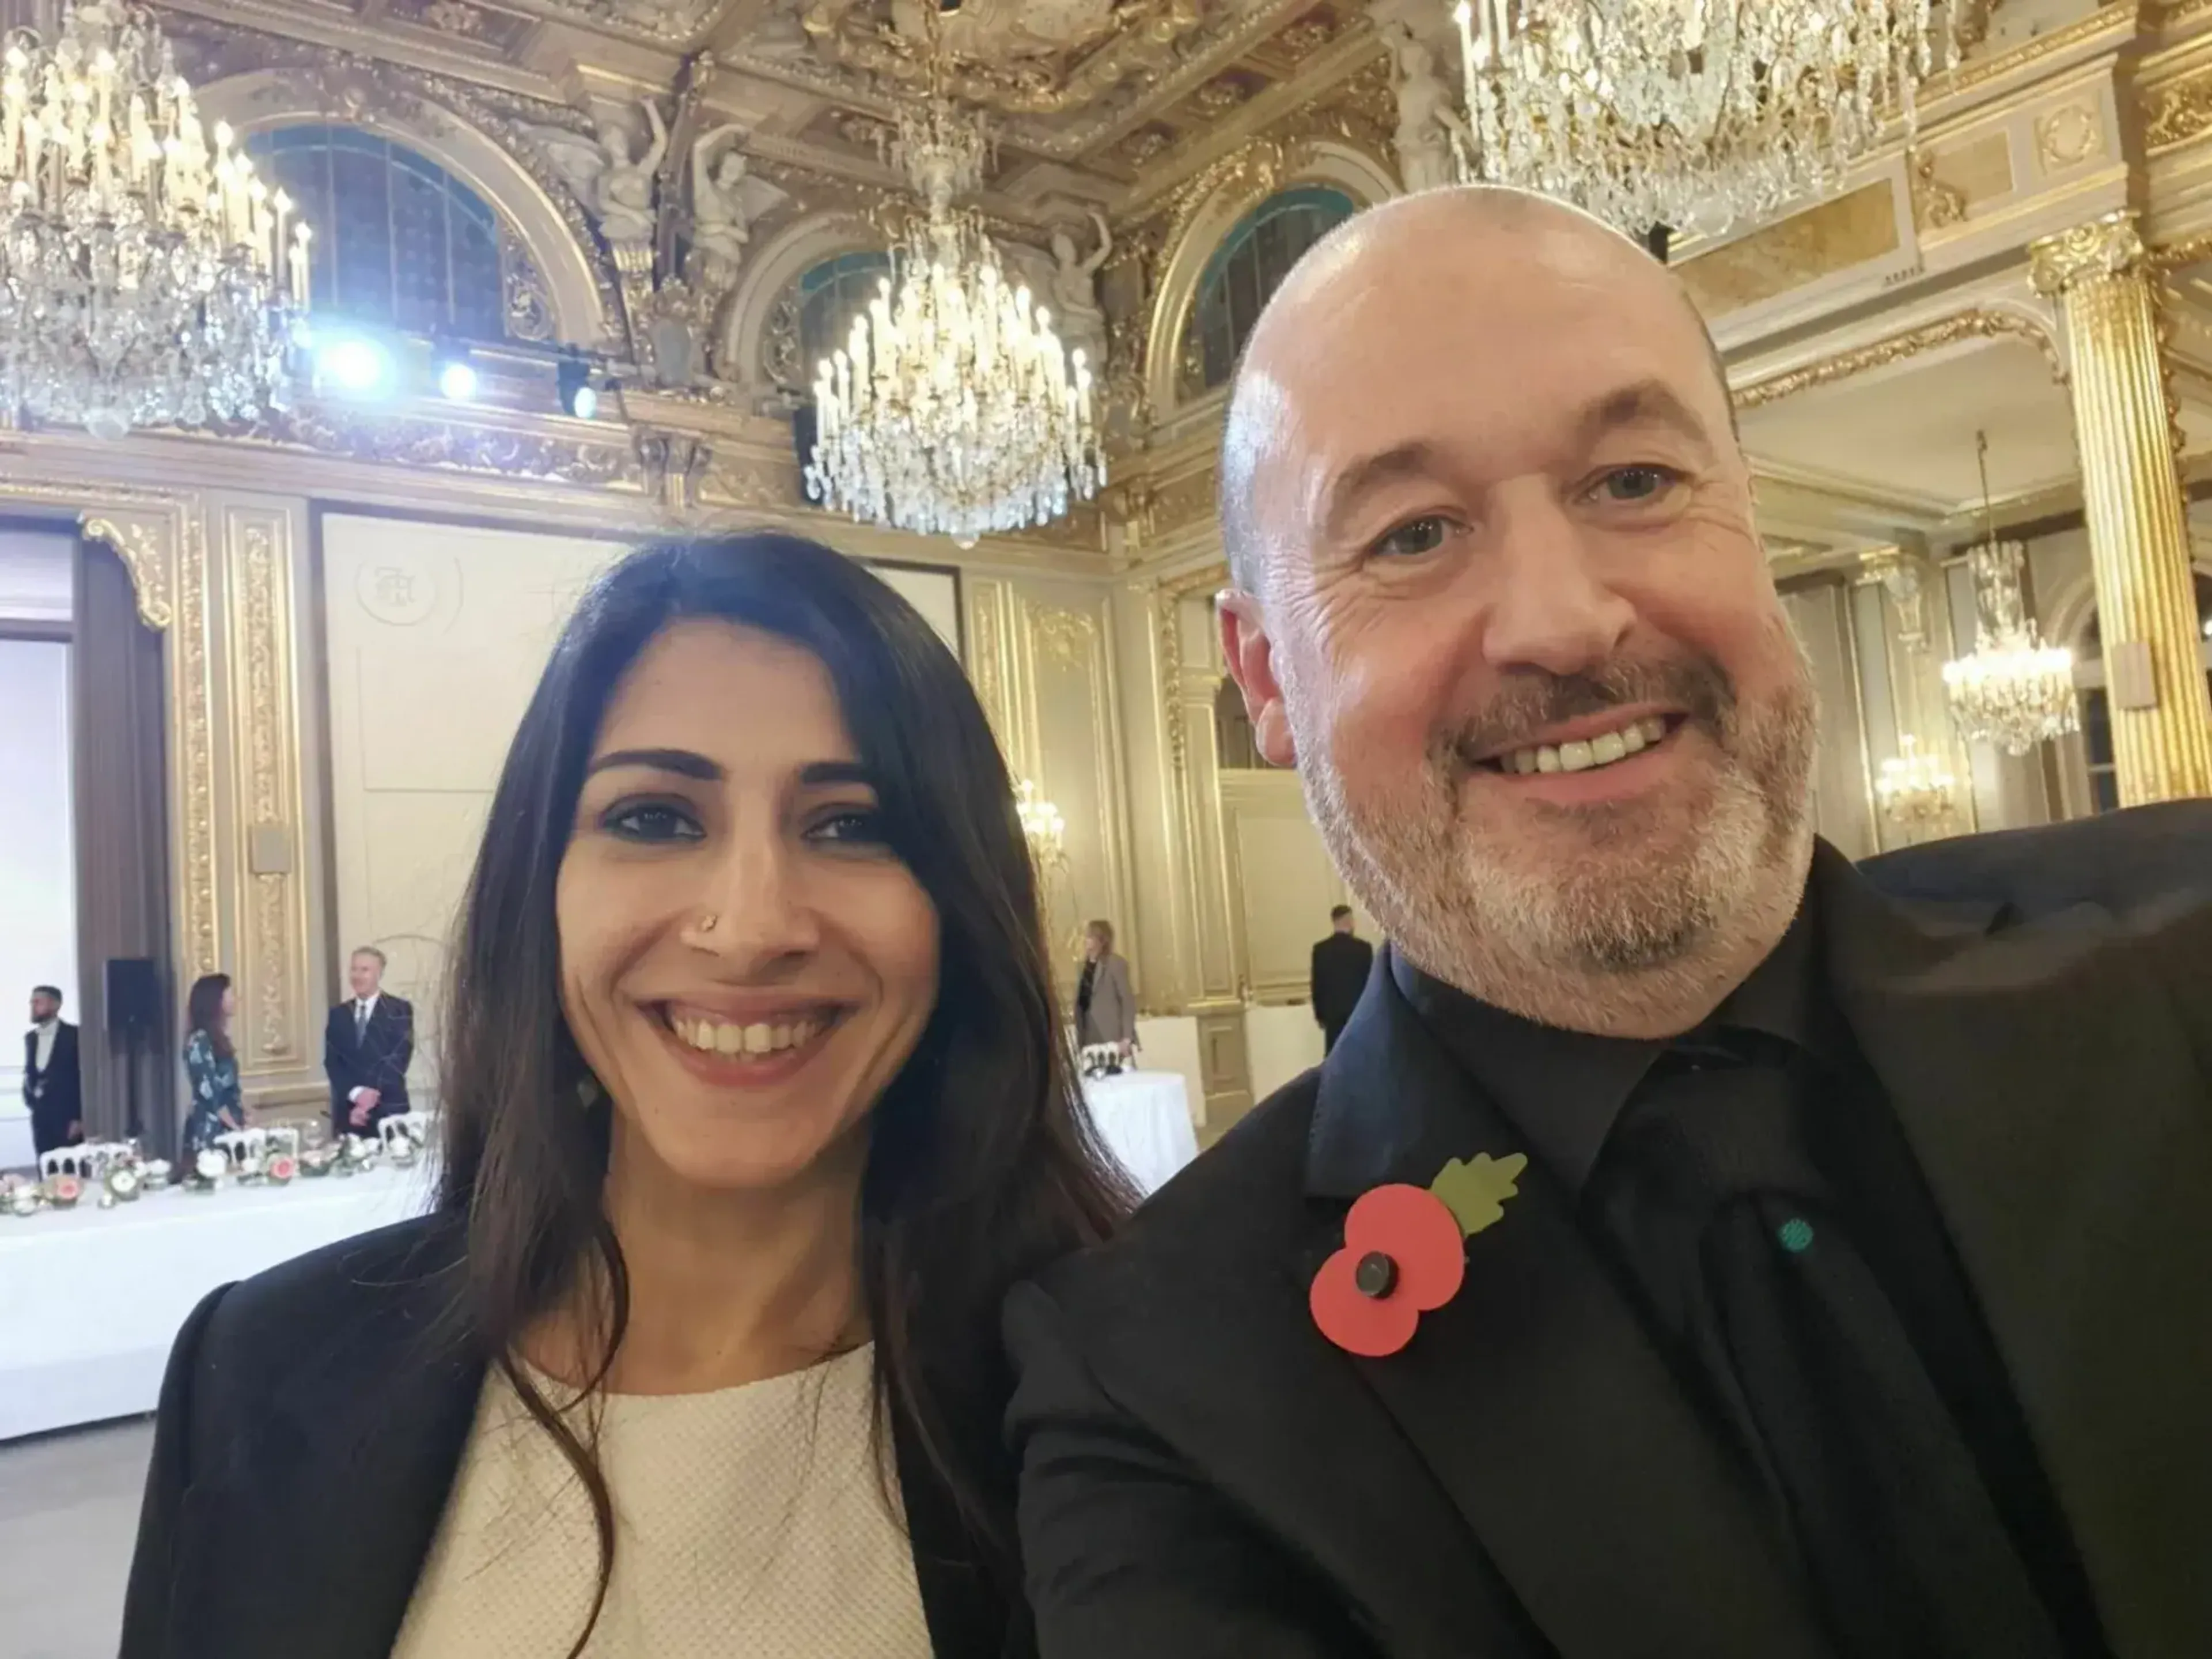 Mike with Urvashi from Global Tech Thinkers, representing PD at the Elysee dinner in Paris with President Macron